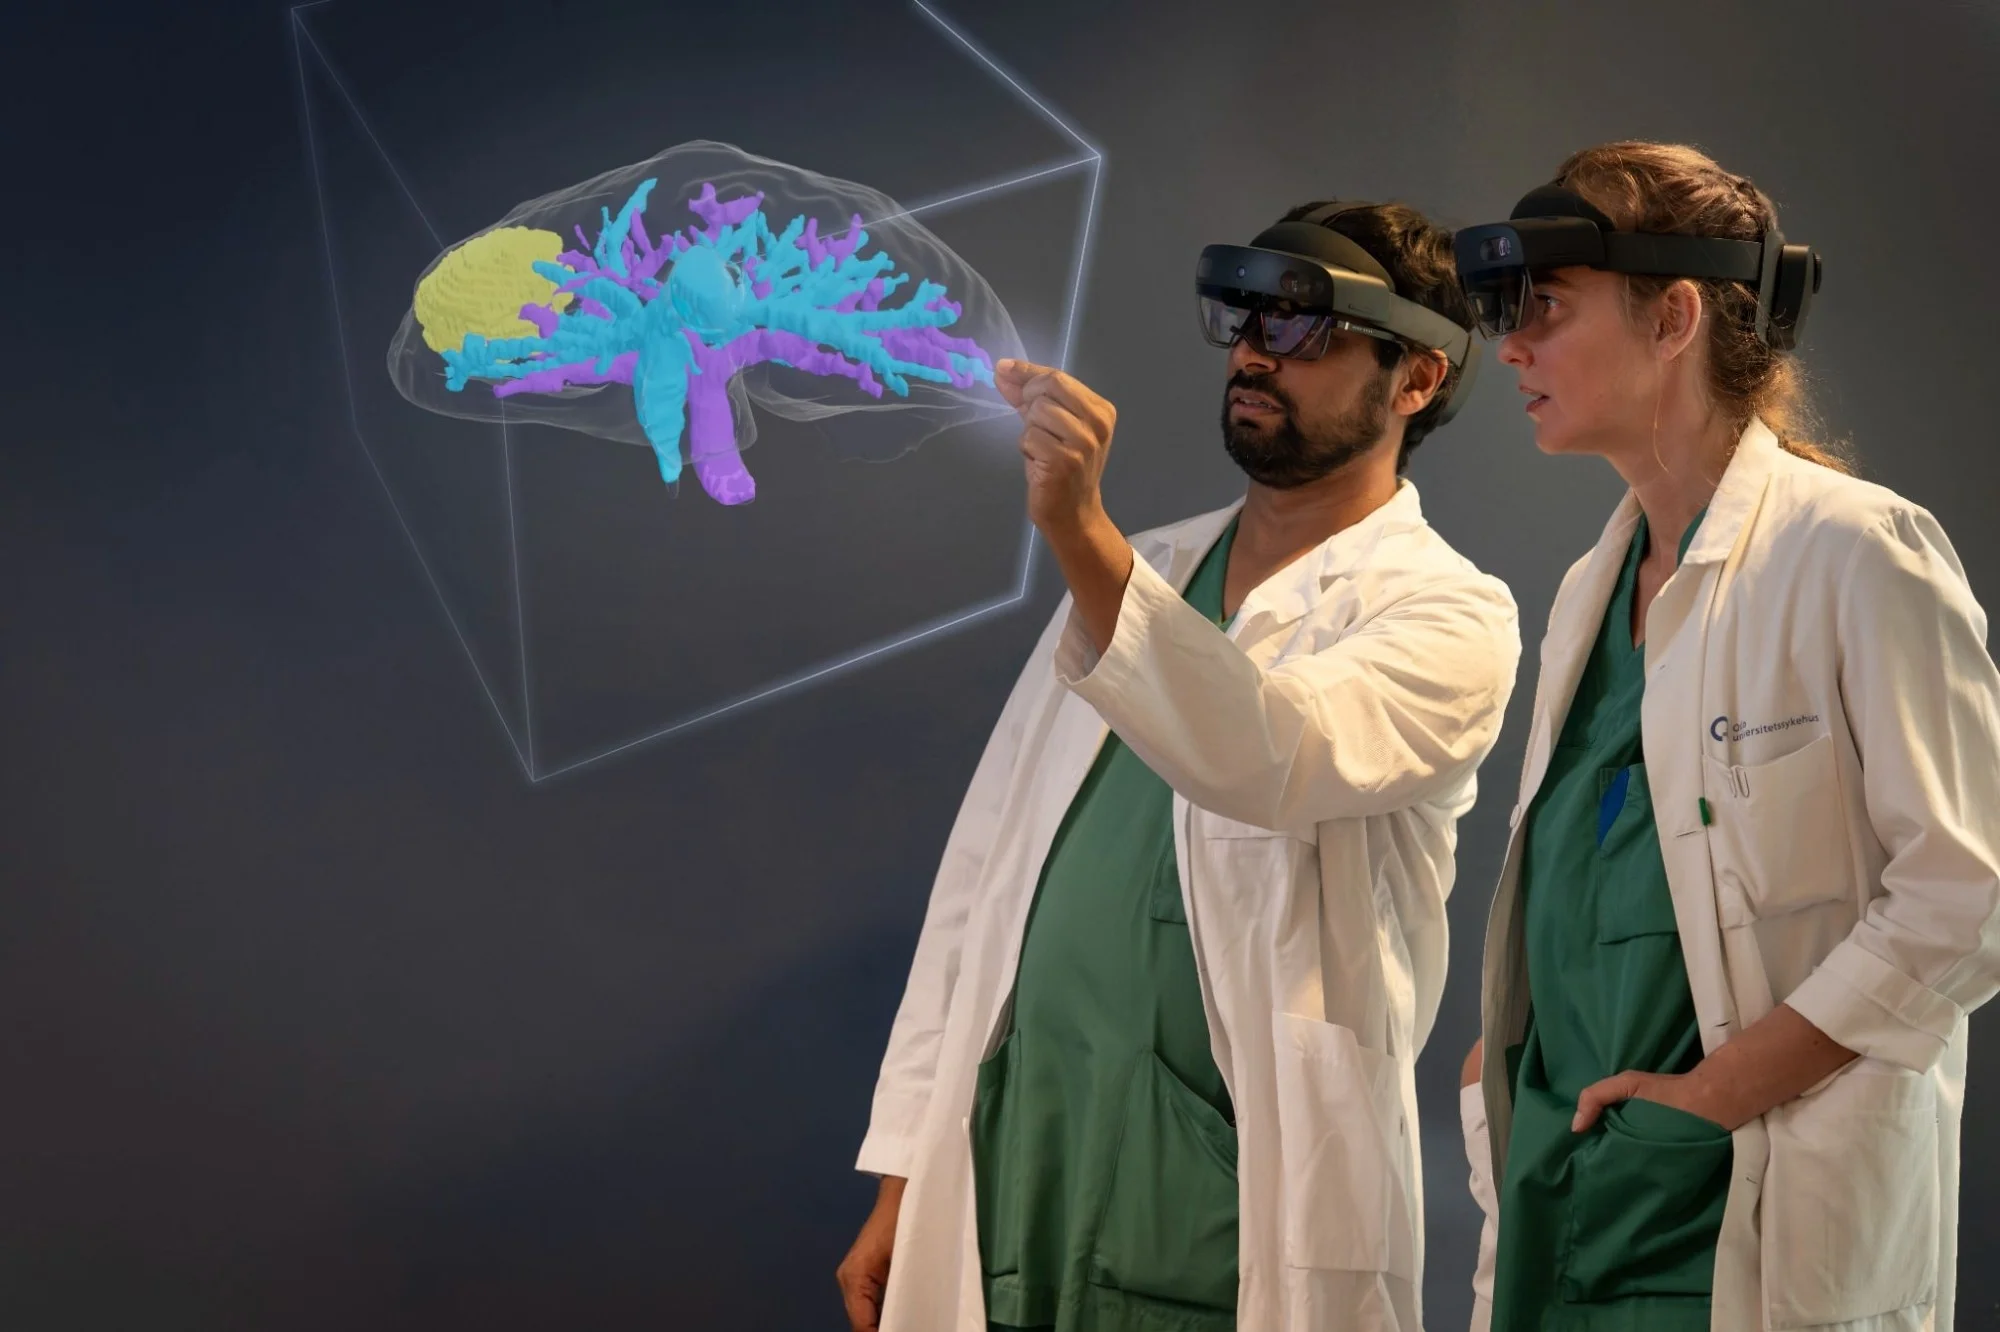 HoloCare launches 3D surgical holograms across the UK and Europe